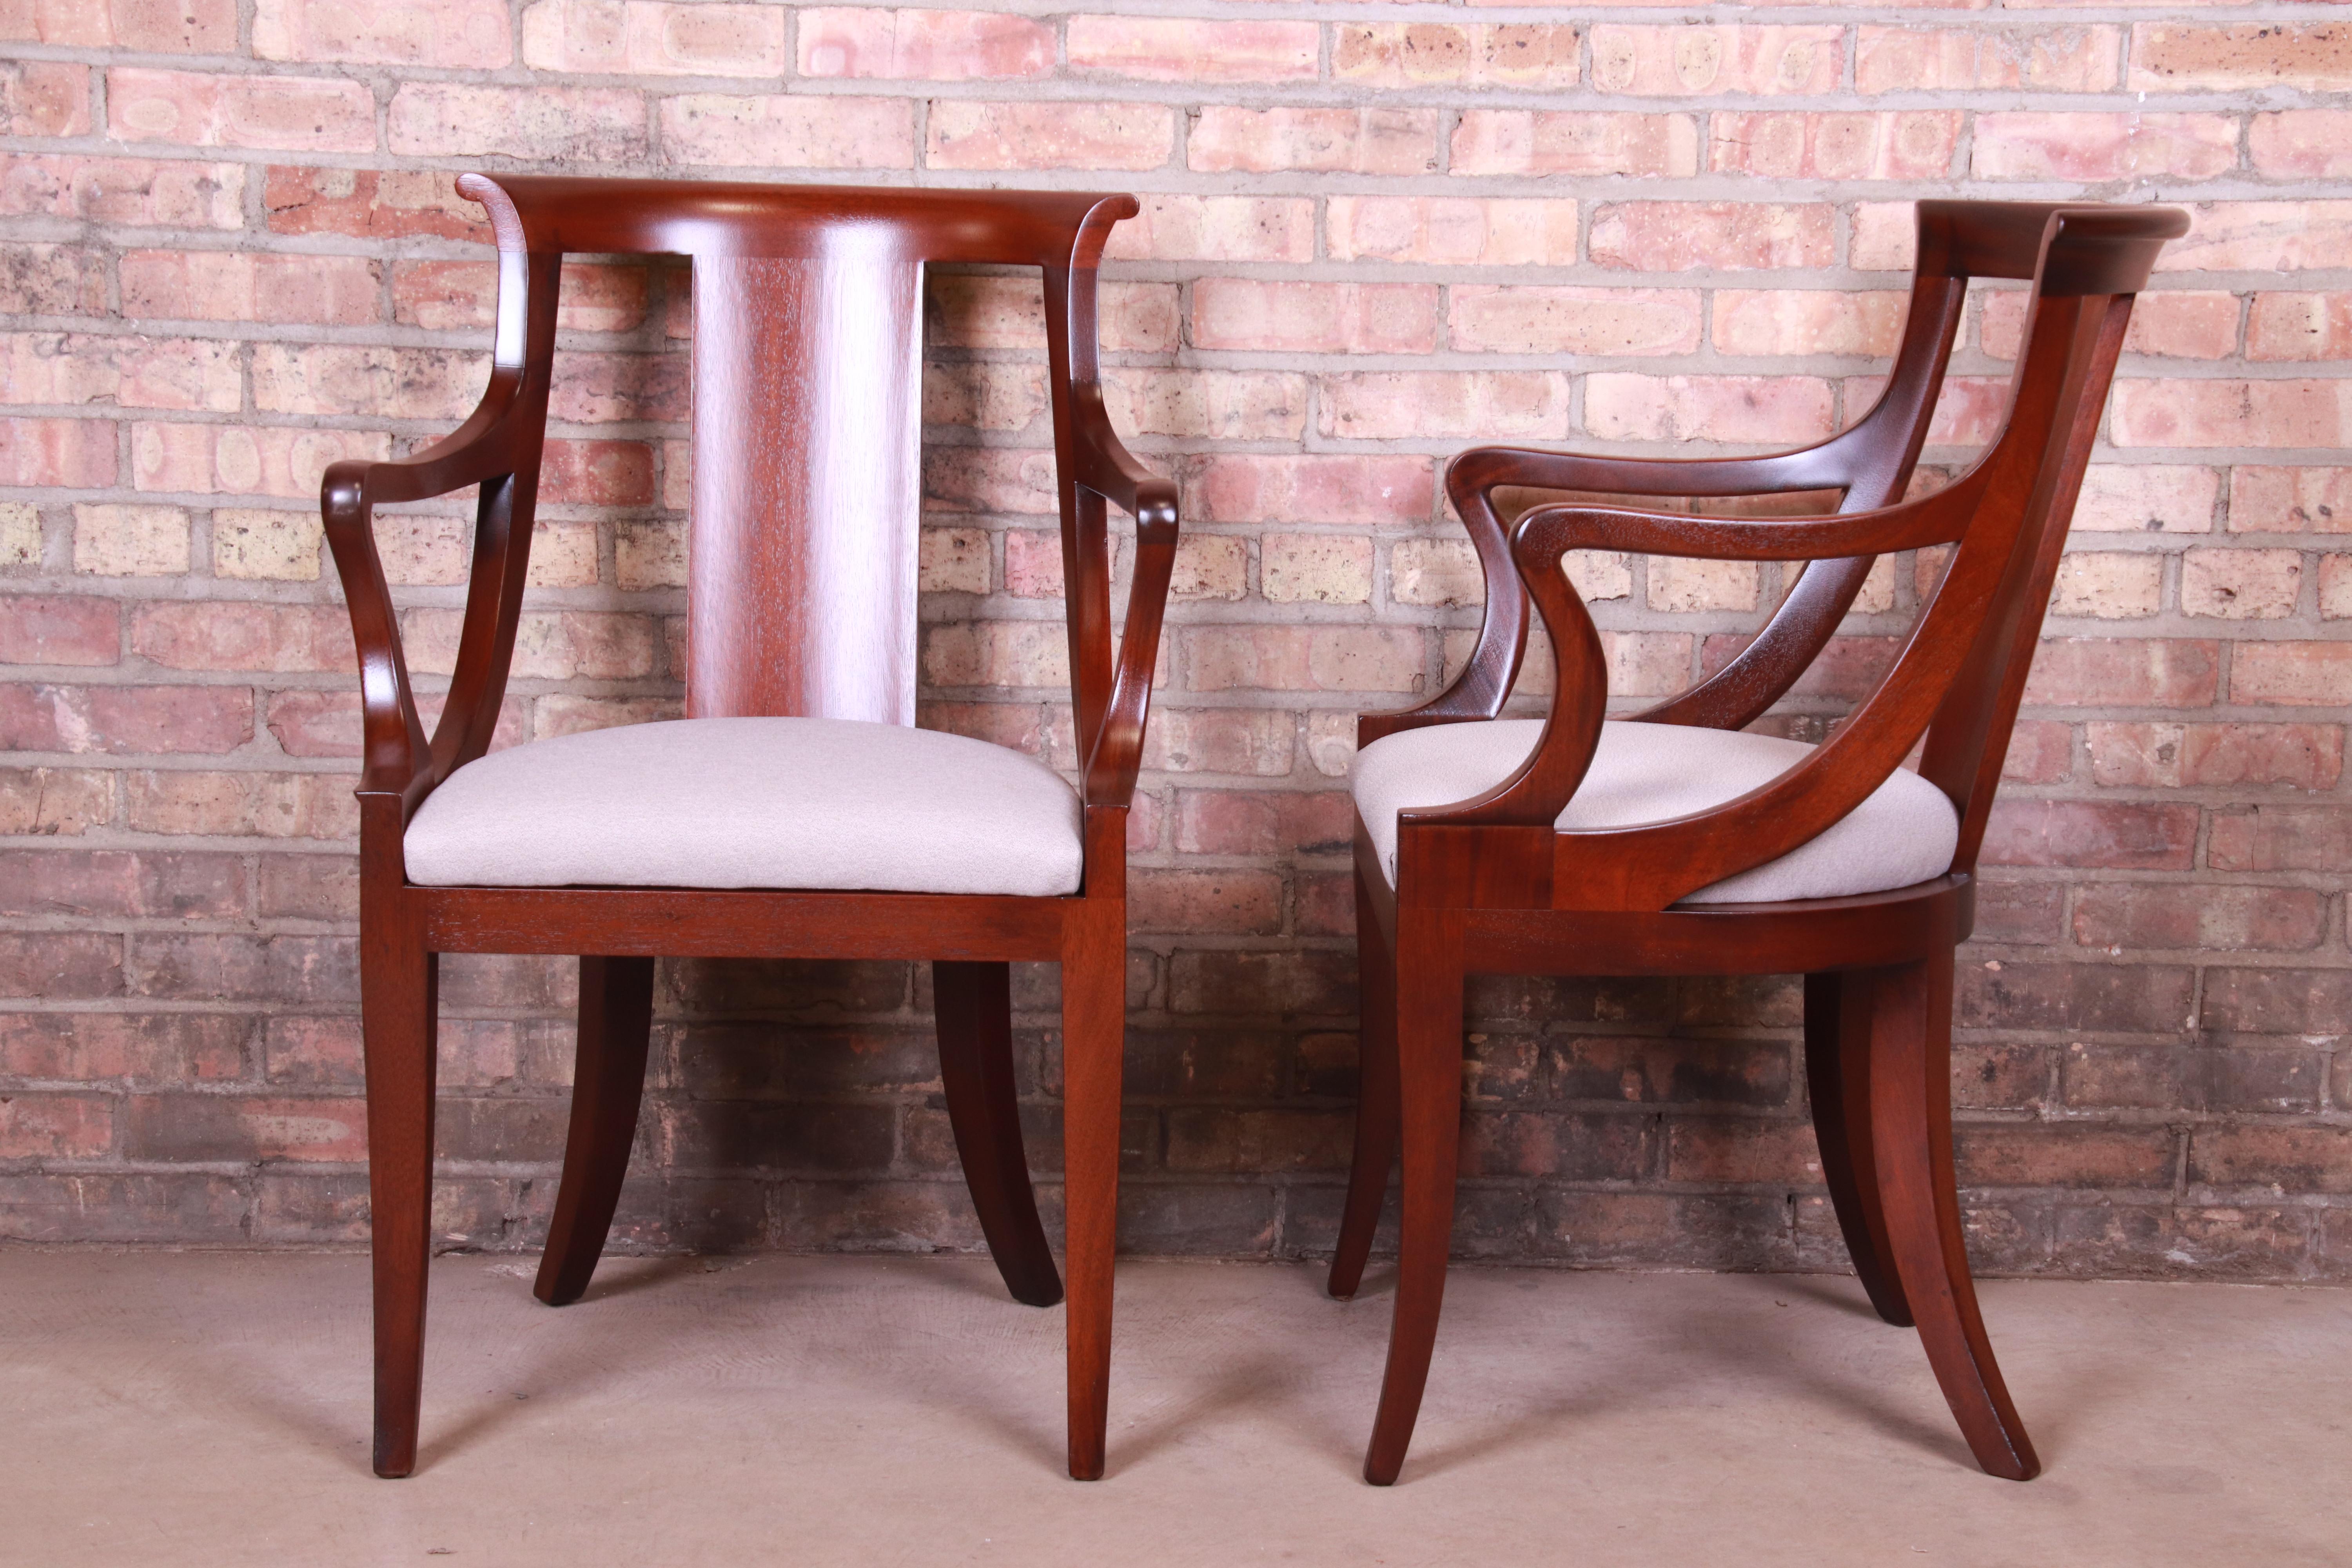 Upholstery Baker Furniture Solid Mahogany Regency Dining Chairs, Fully Restored